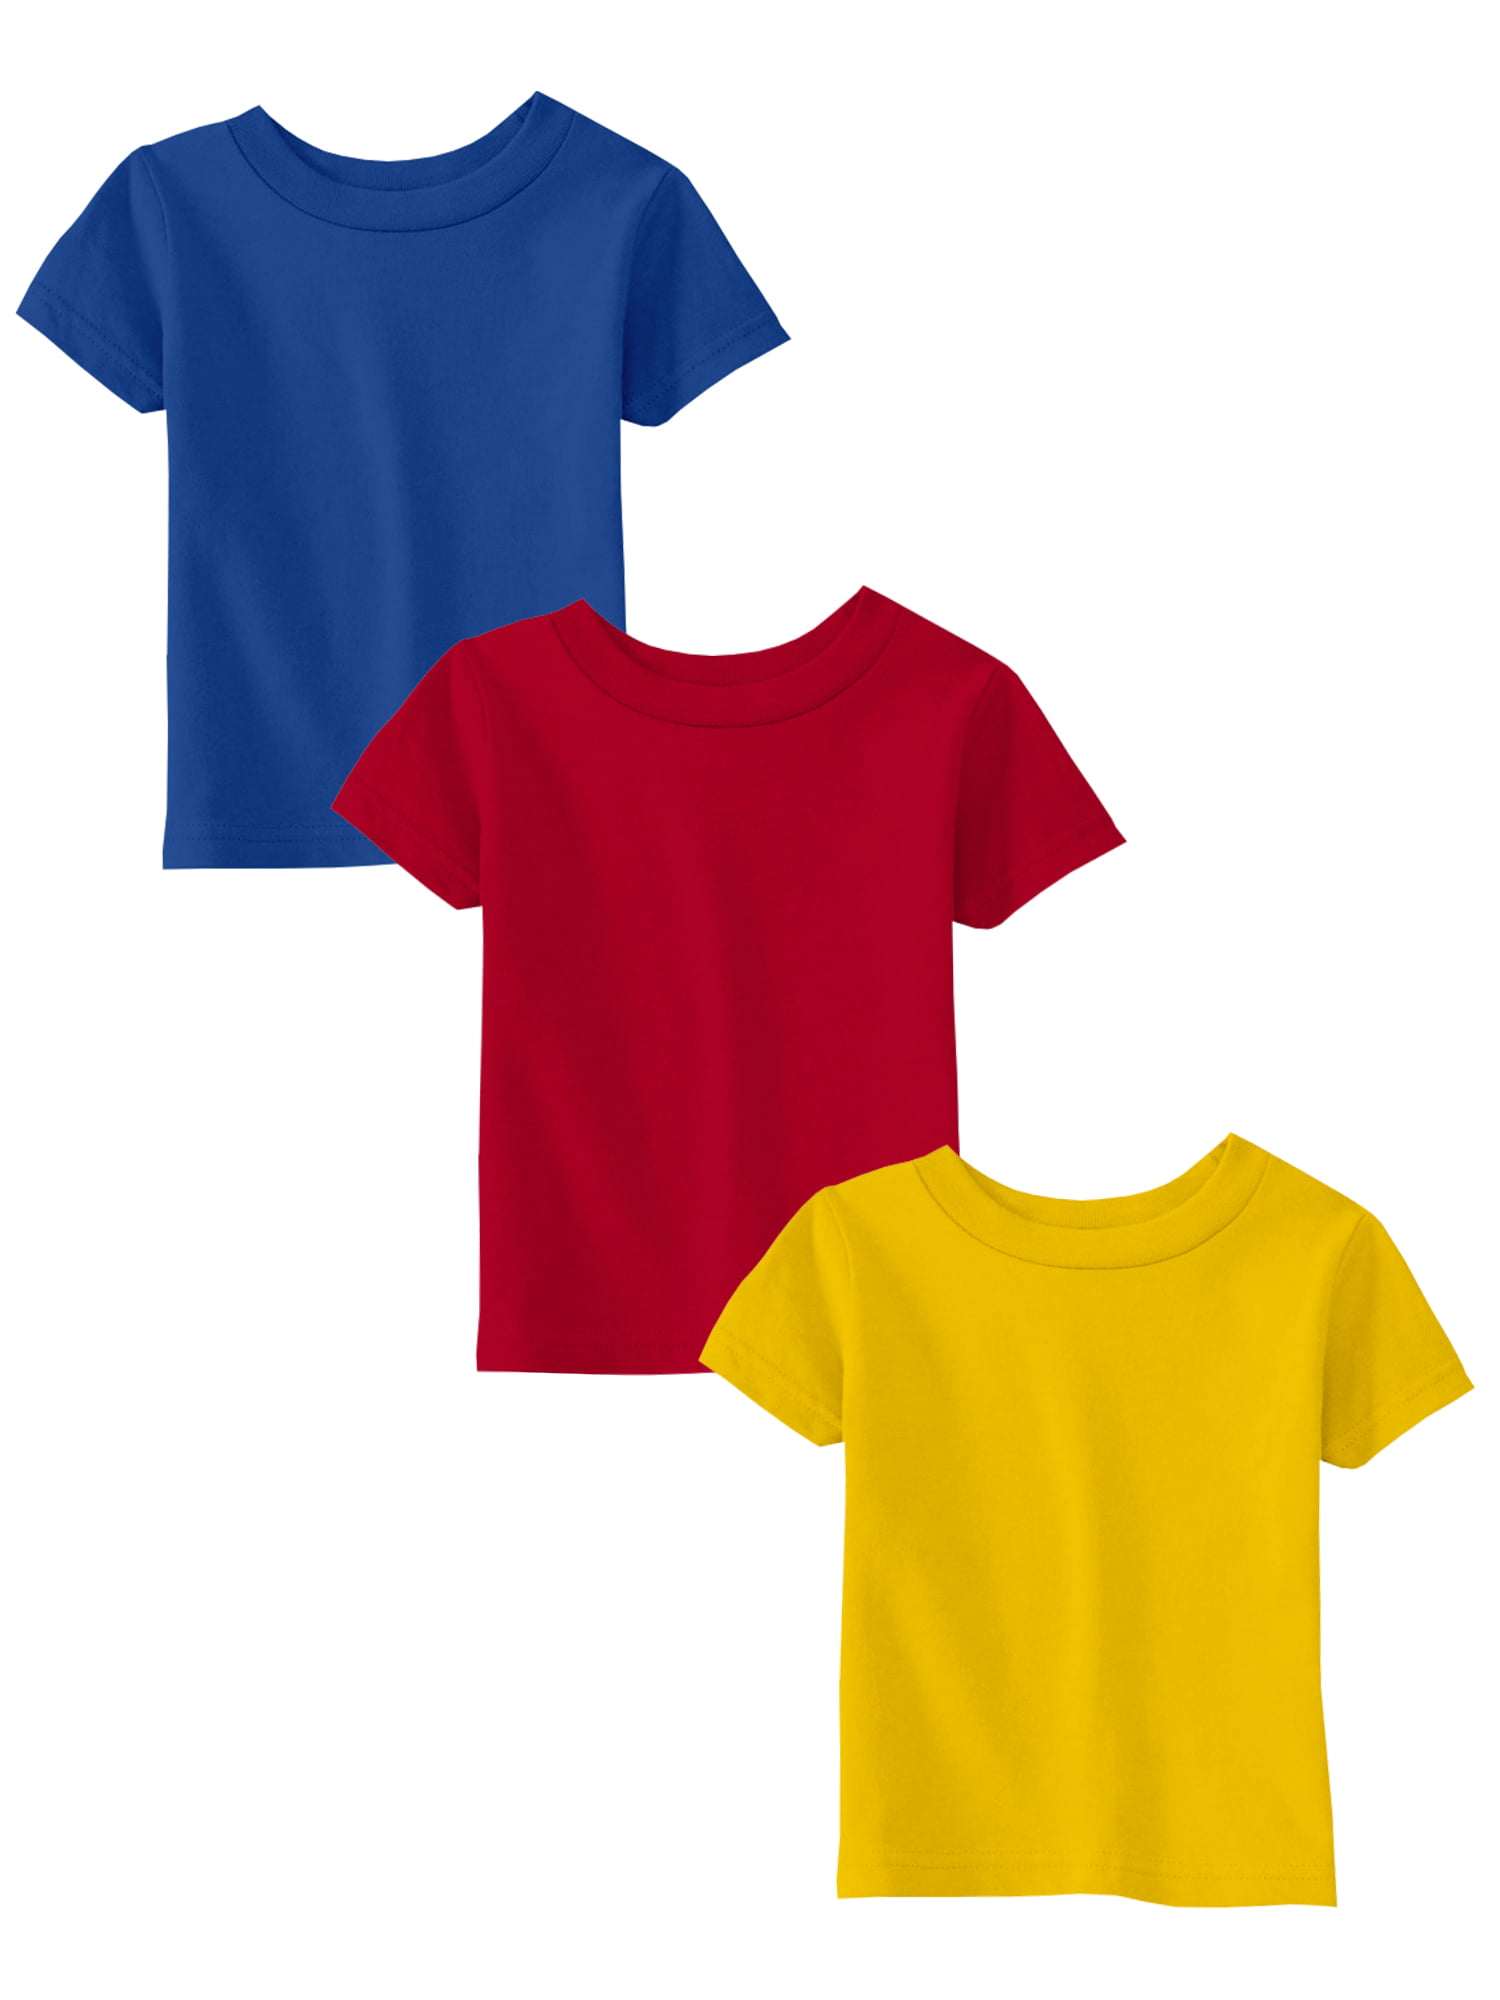 blue yellow and red shirt